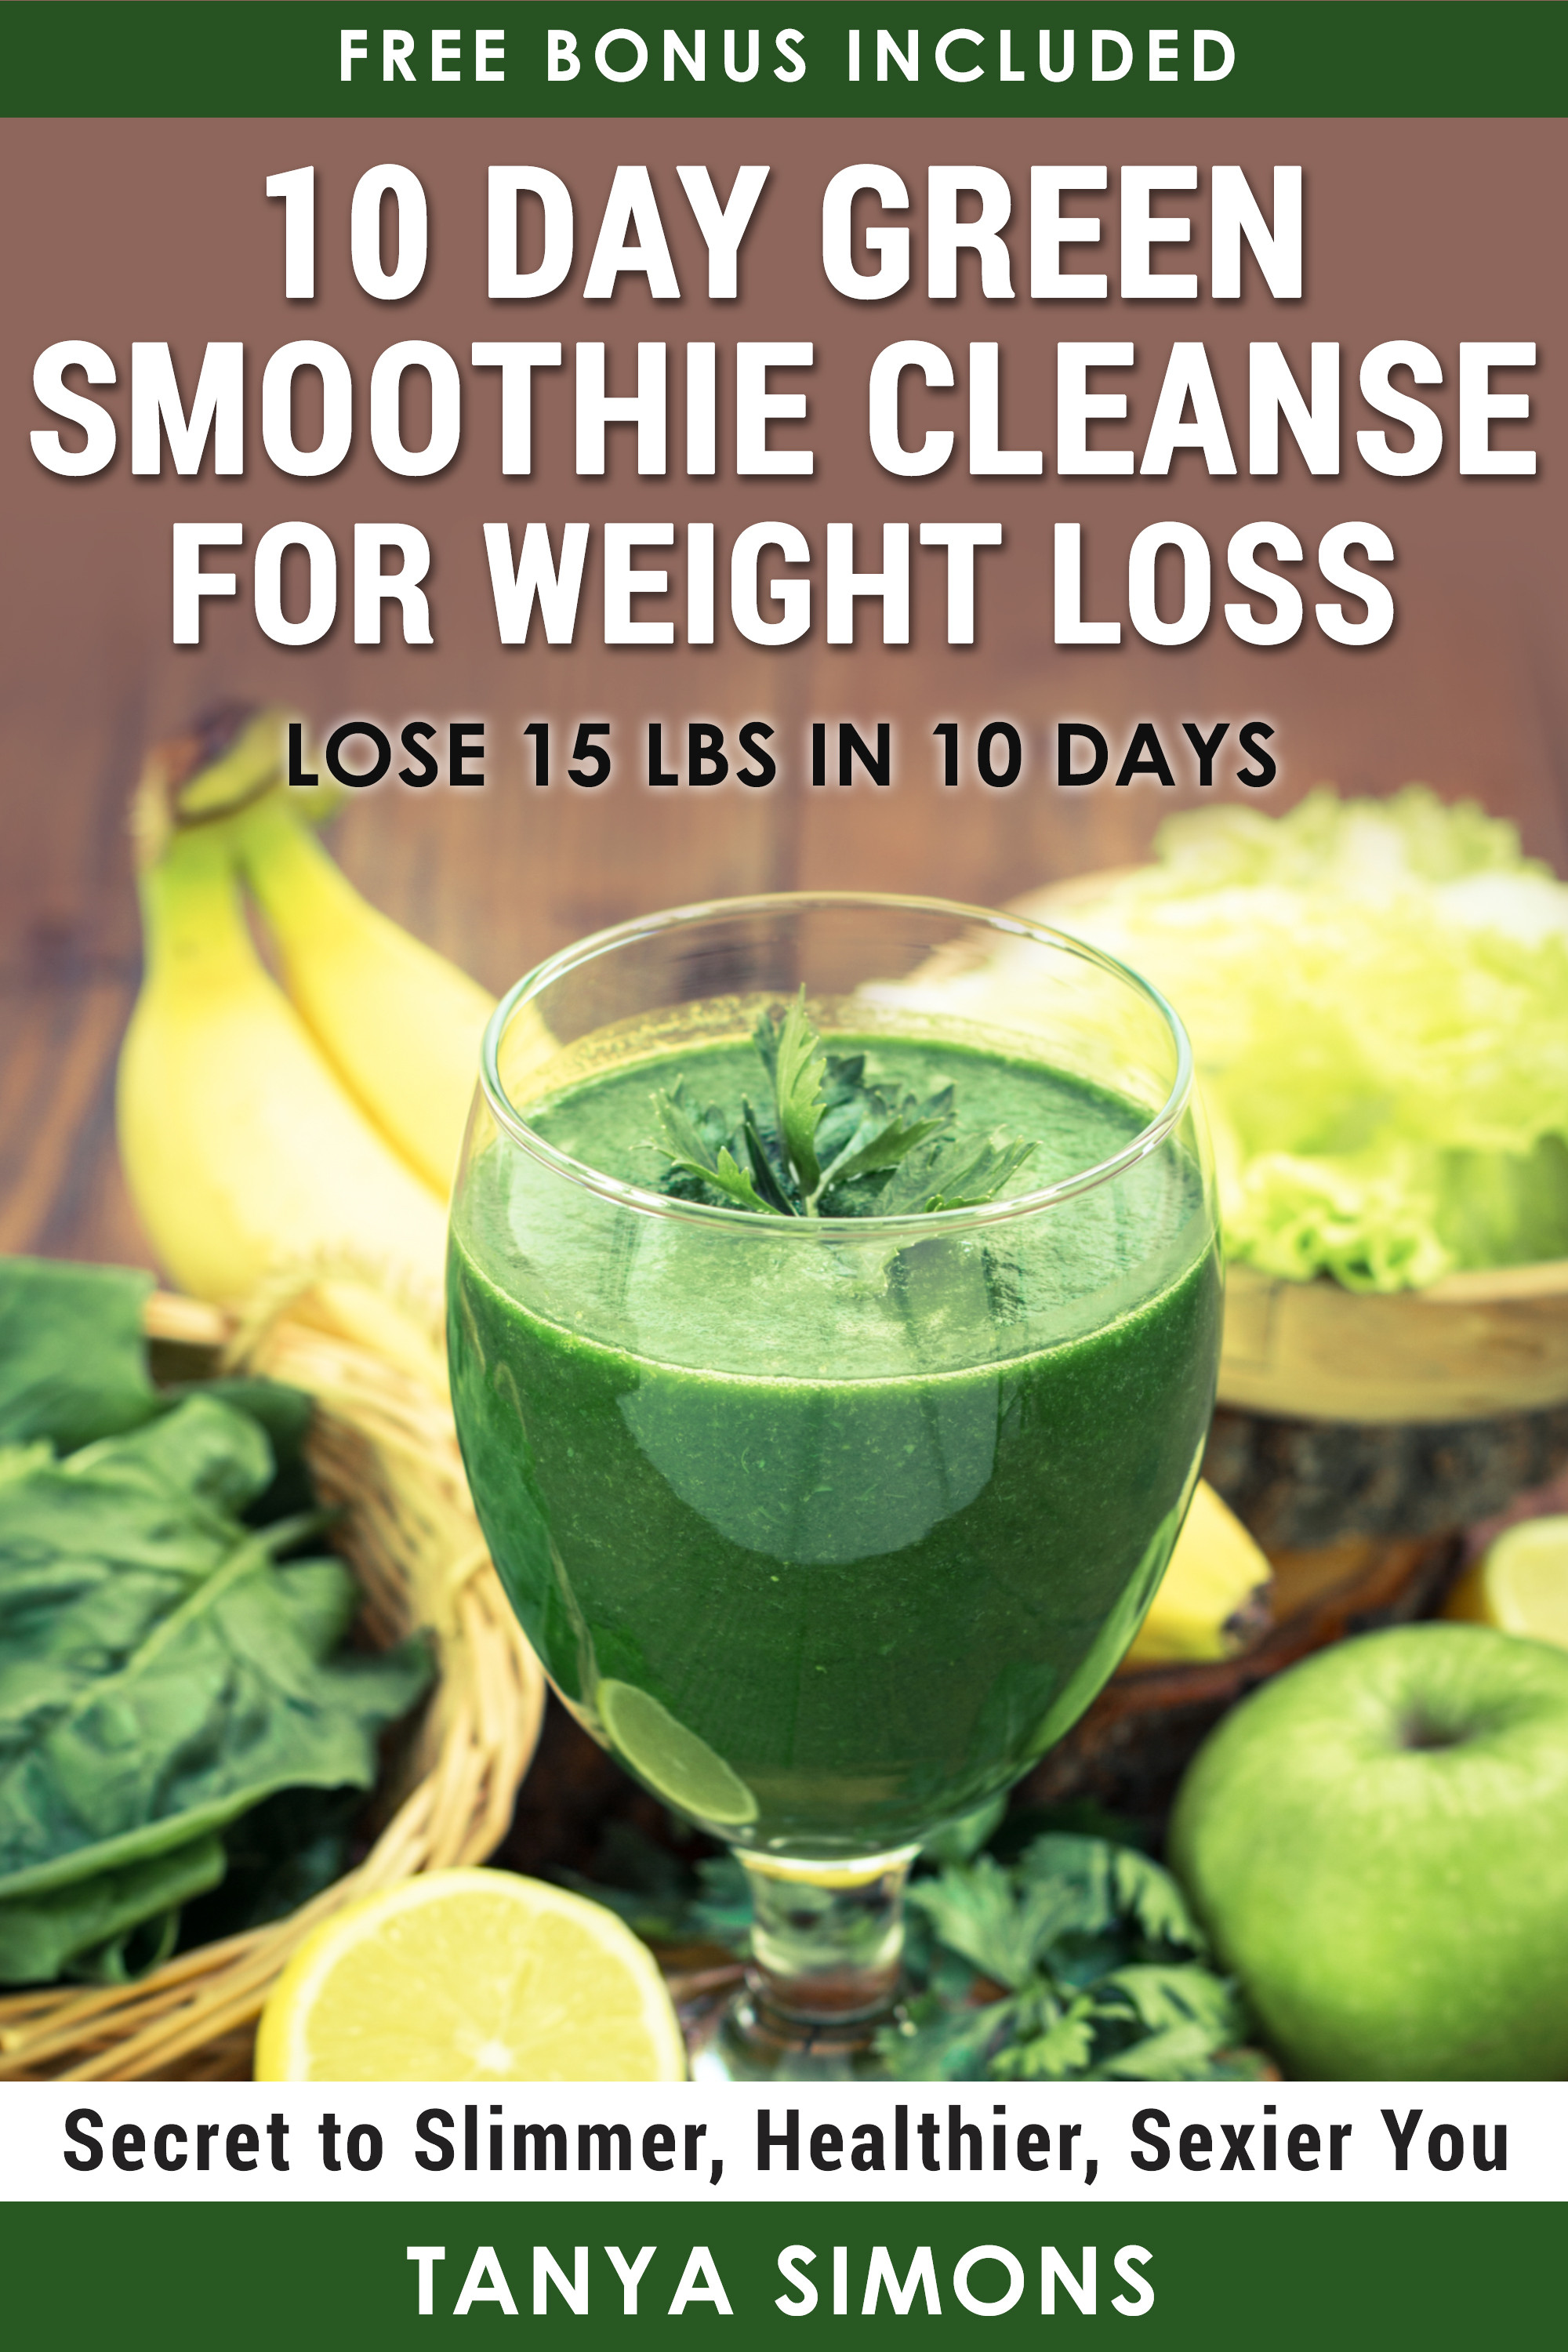 Green Detox Smoothie Recipes For Weight Loss
 10 Day Green Smoothie Cleanse For Weight Loss Delicious